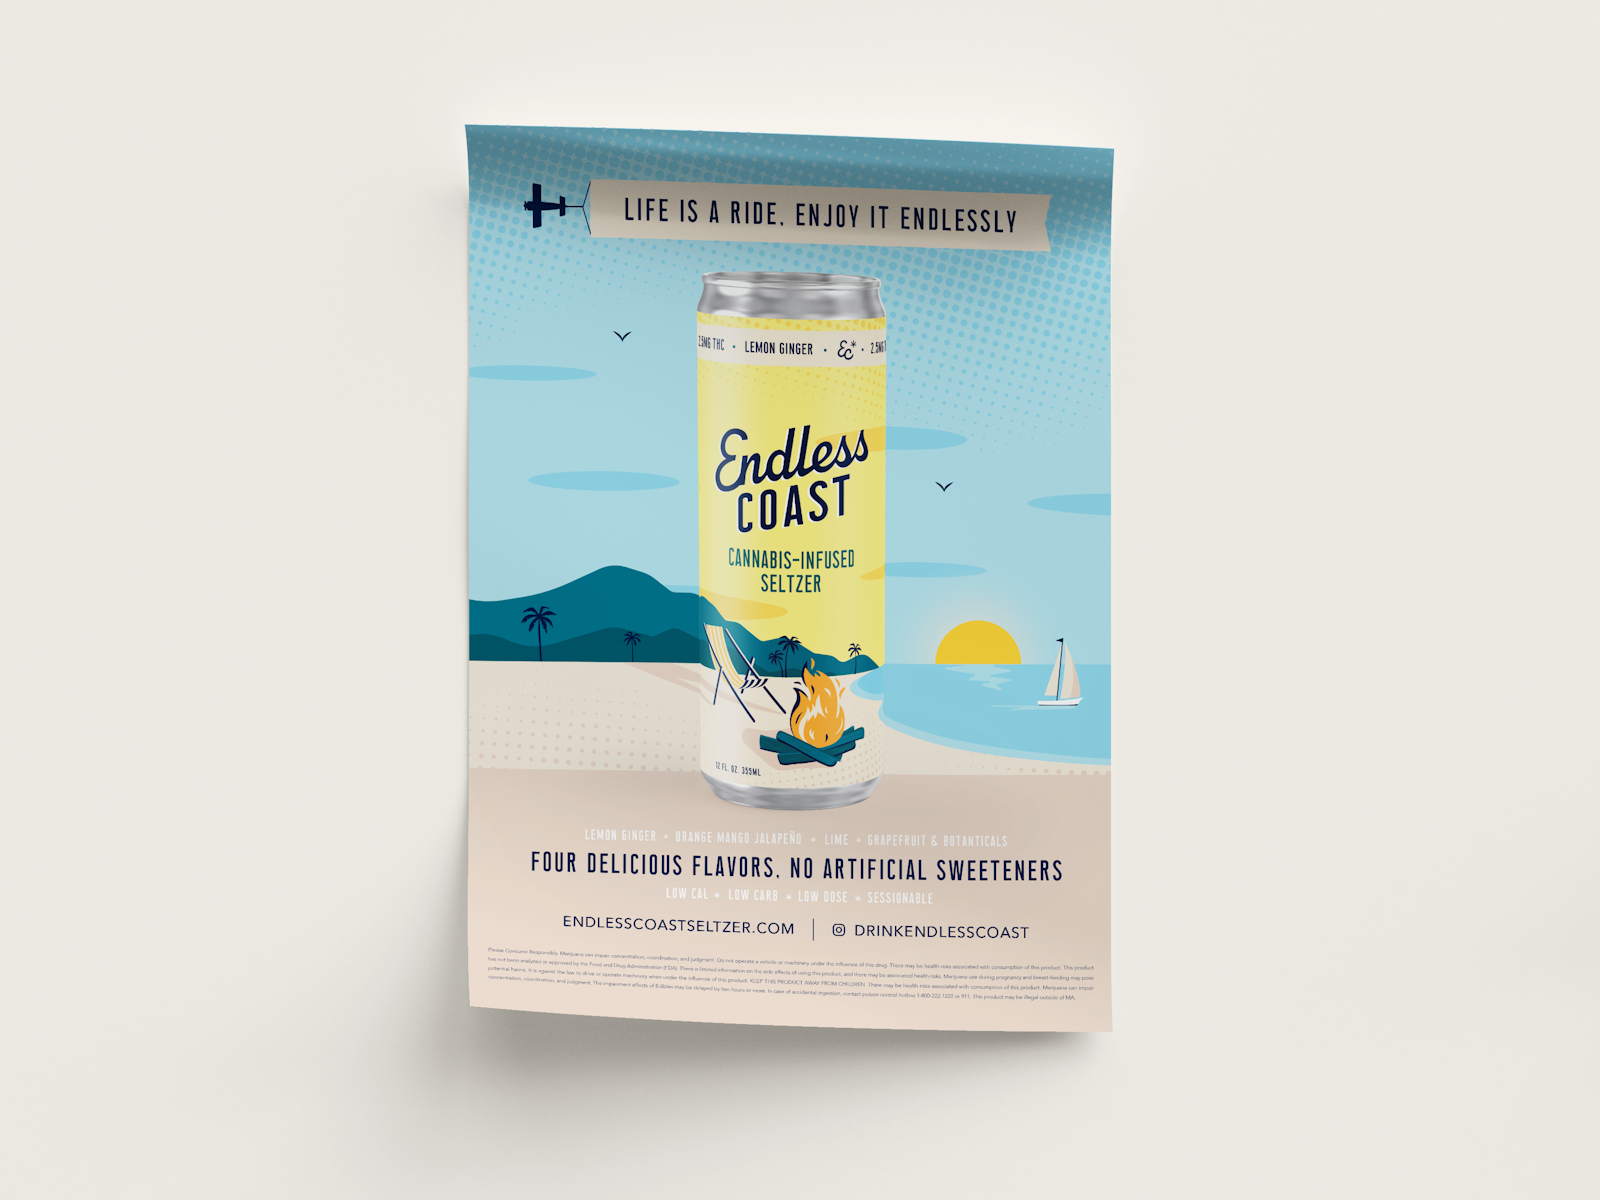 The Endless Coast brand campaign design of poster showing can design on beach scene.